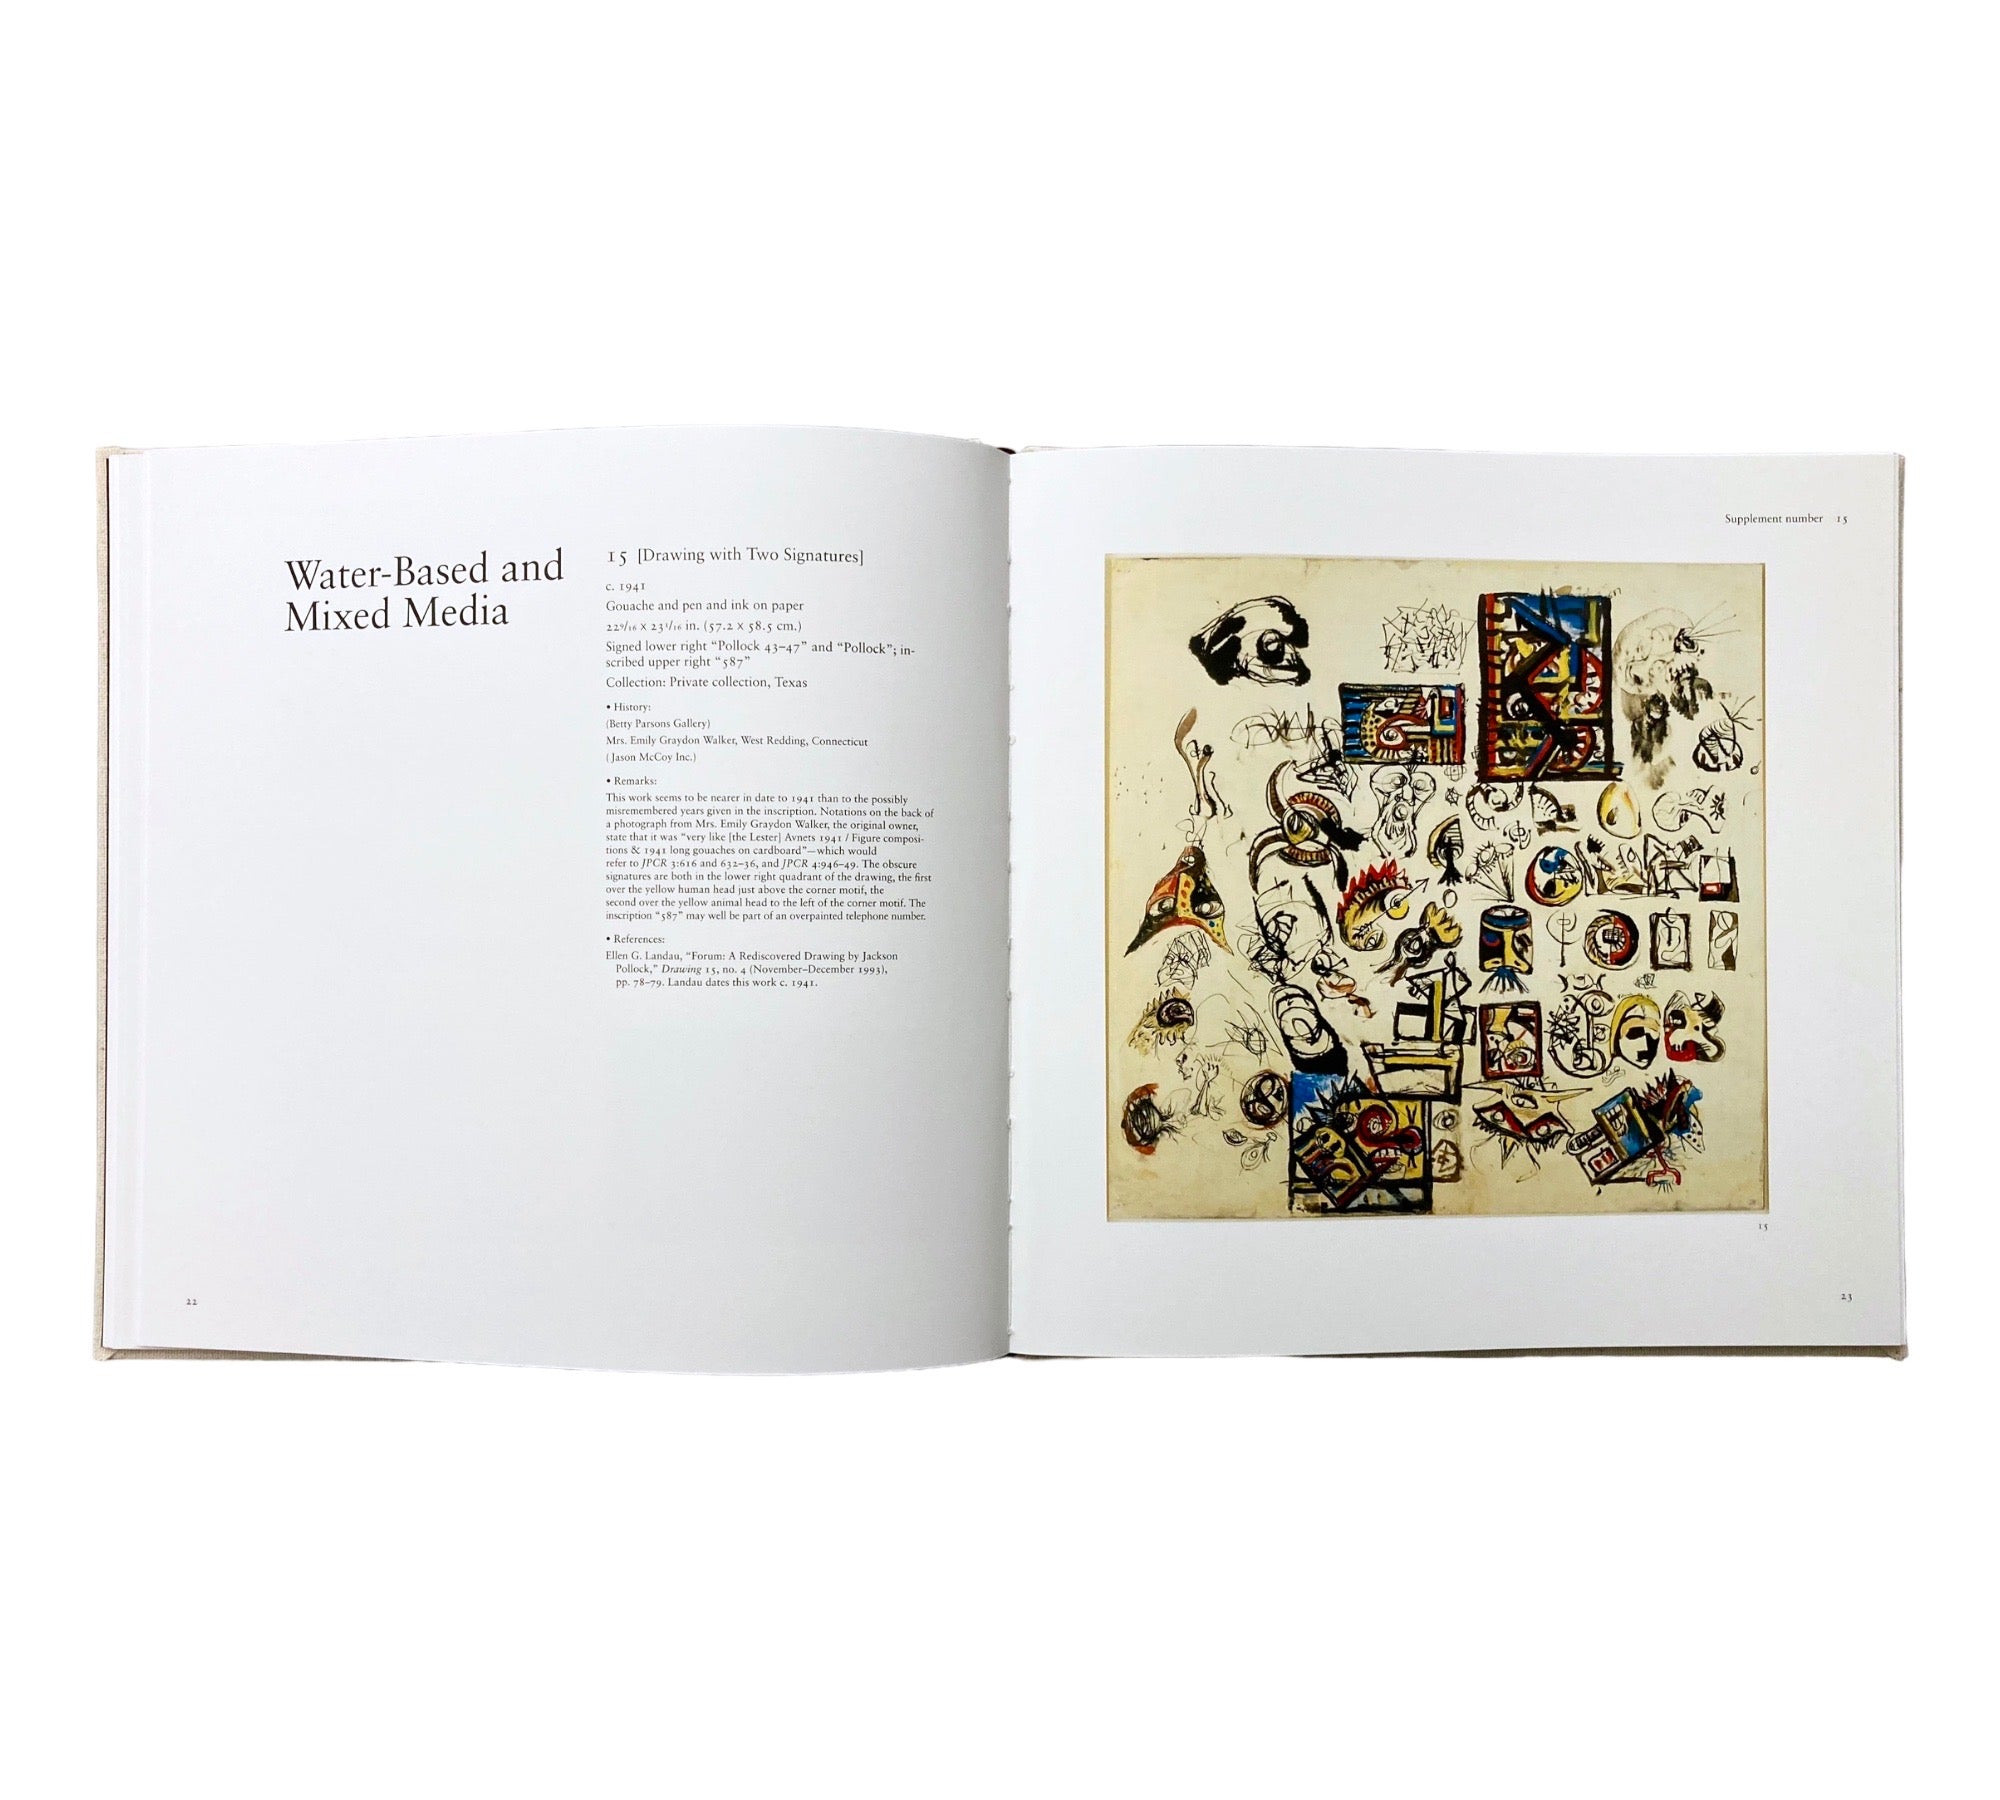 Jackson Pollock: Supplement Number One to a Catalogue Raisonné of Paintings, Drawings and Other Works